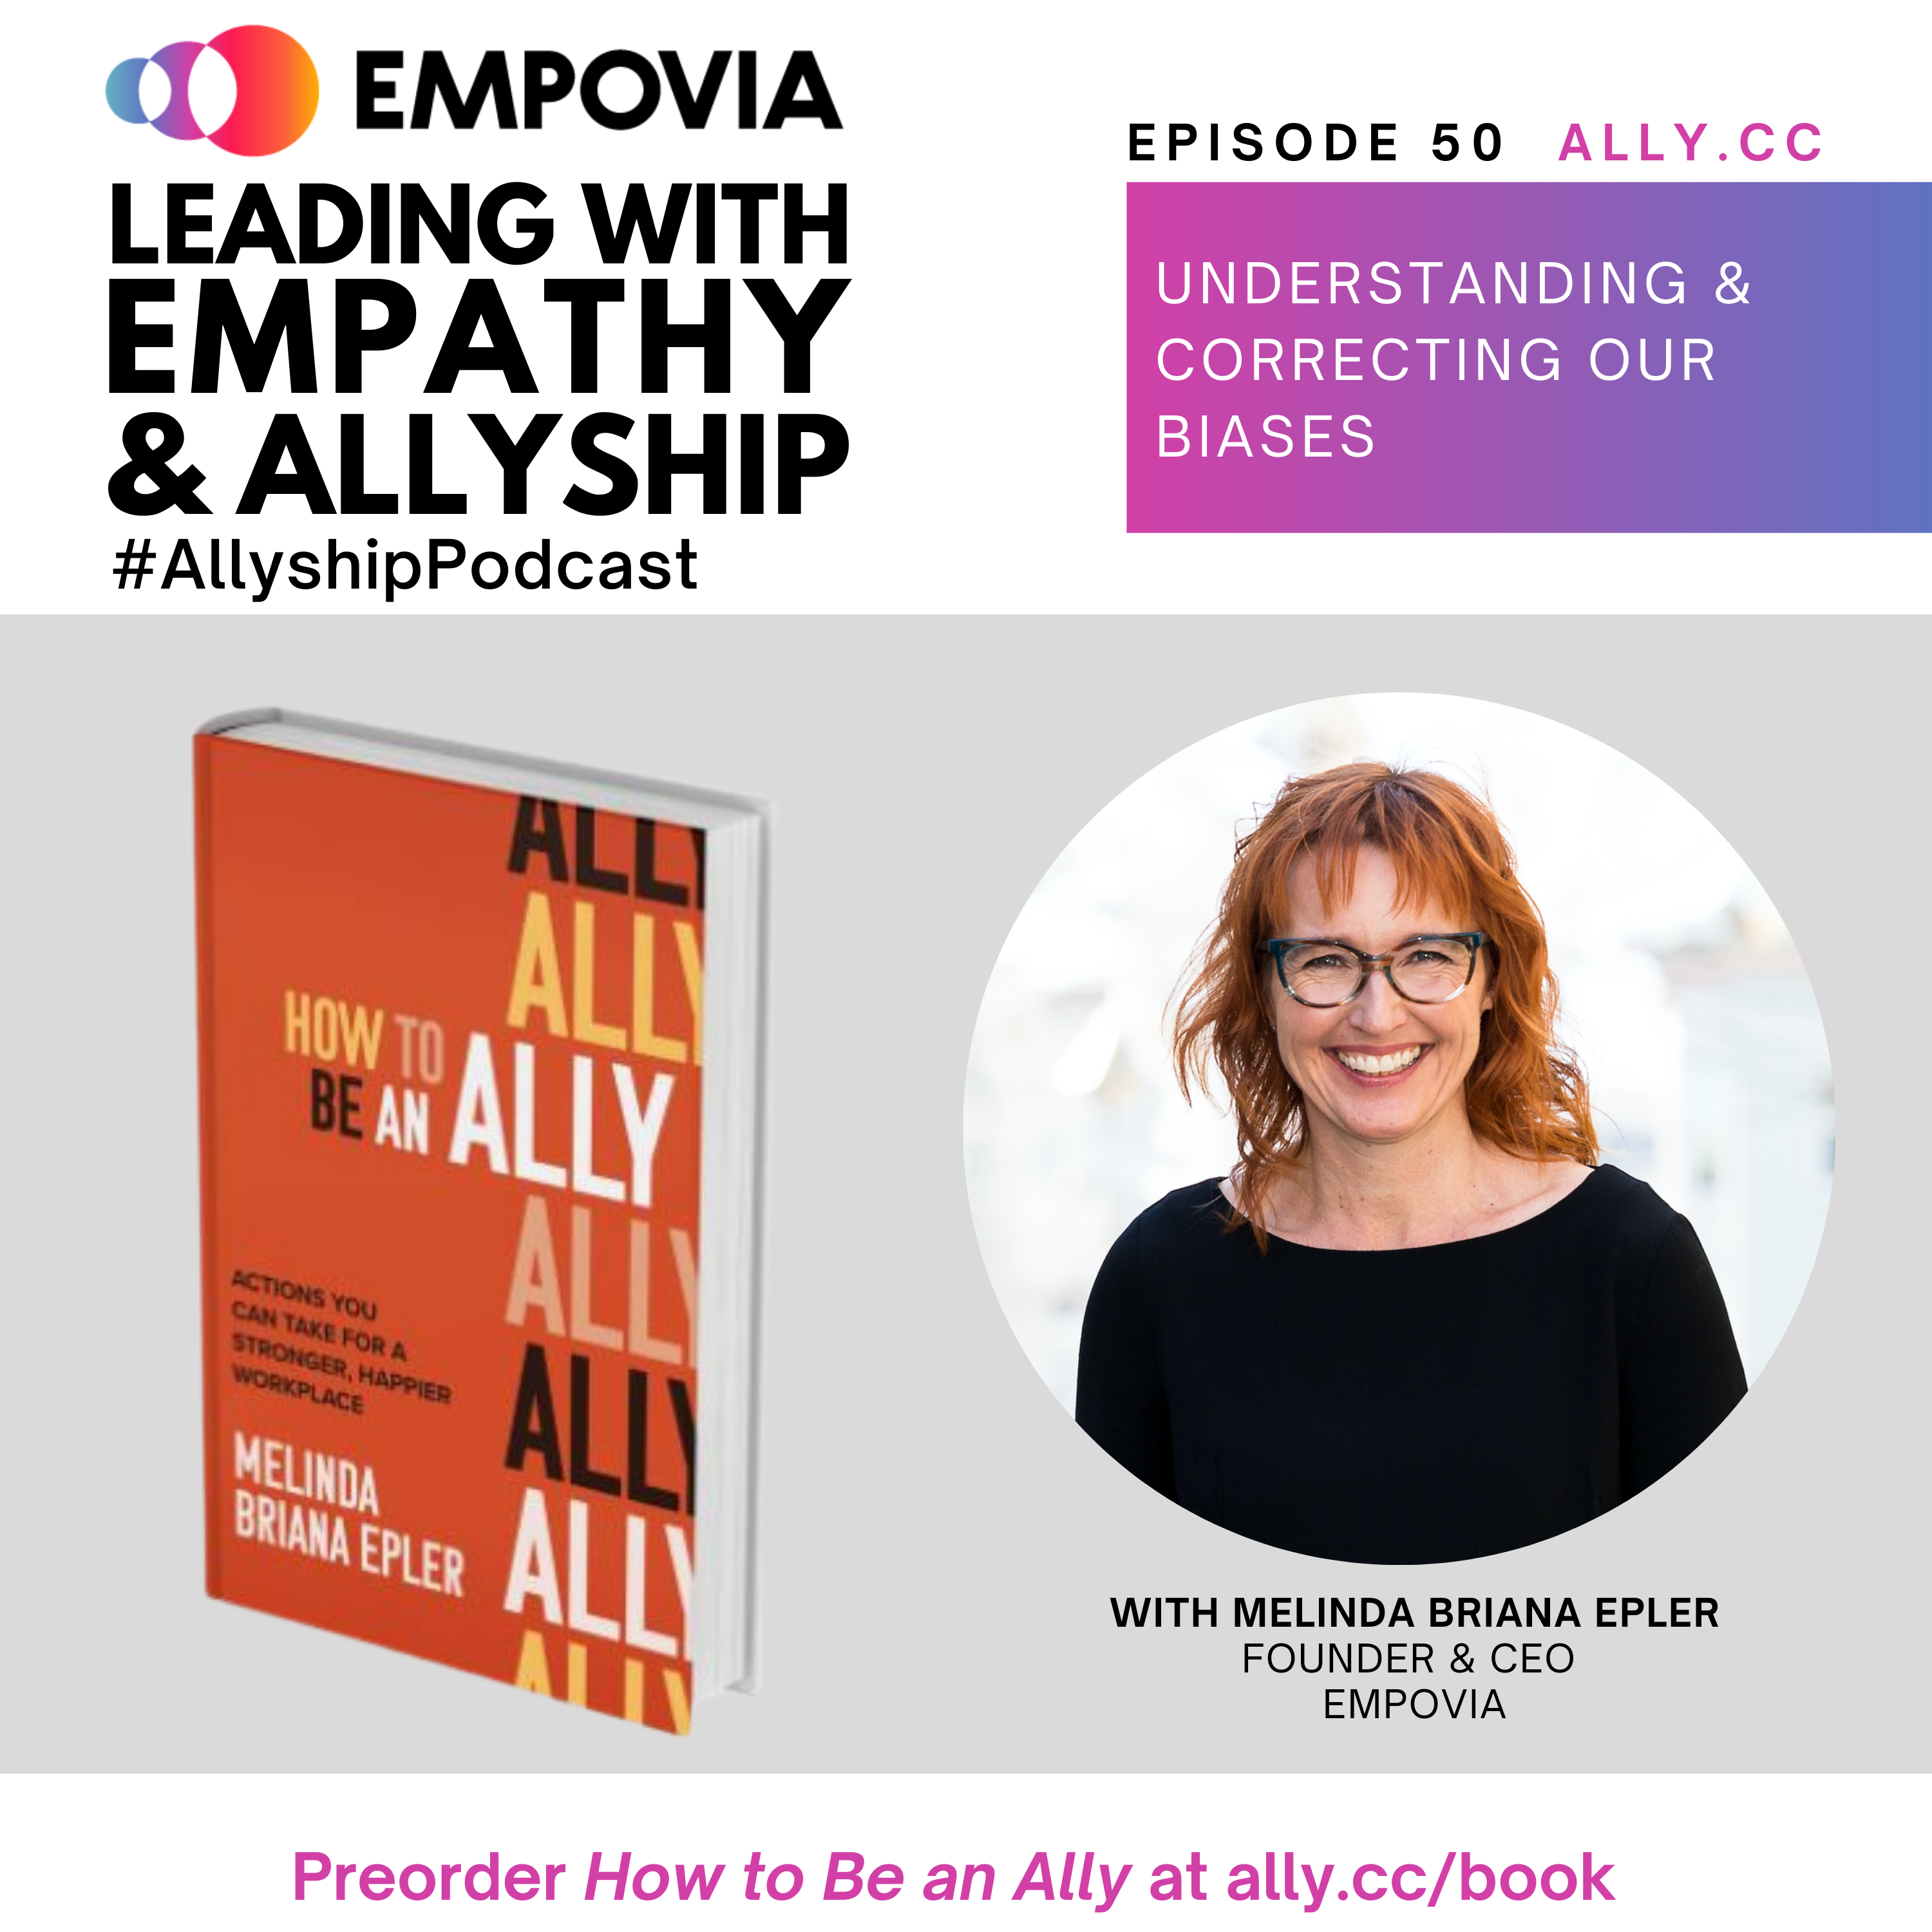 Leading With Empathy & Allyship promo with the Empovia logo and photos of Melinda Briana Epler; a White woman with red hair, glasses, and black shirt; and the orange book cover of HOW TO BE AN ALLY.